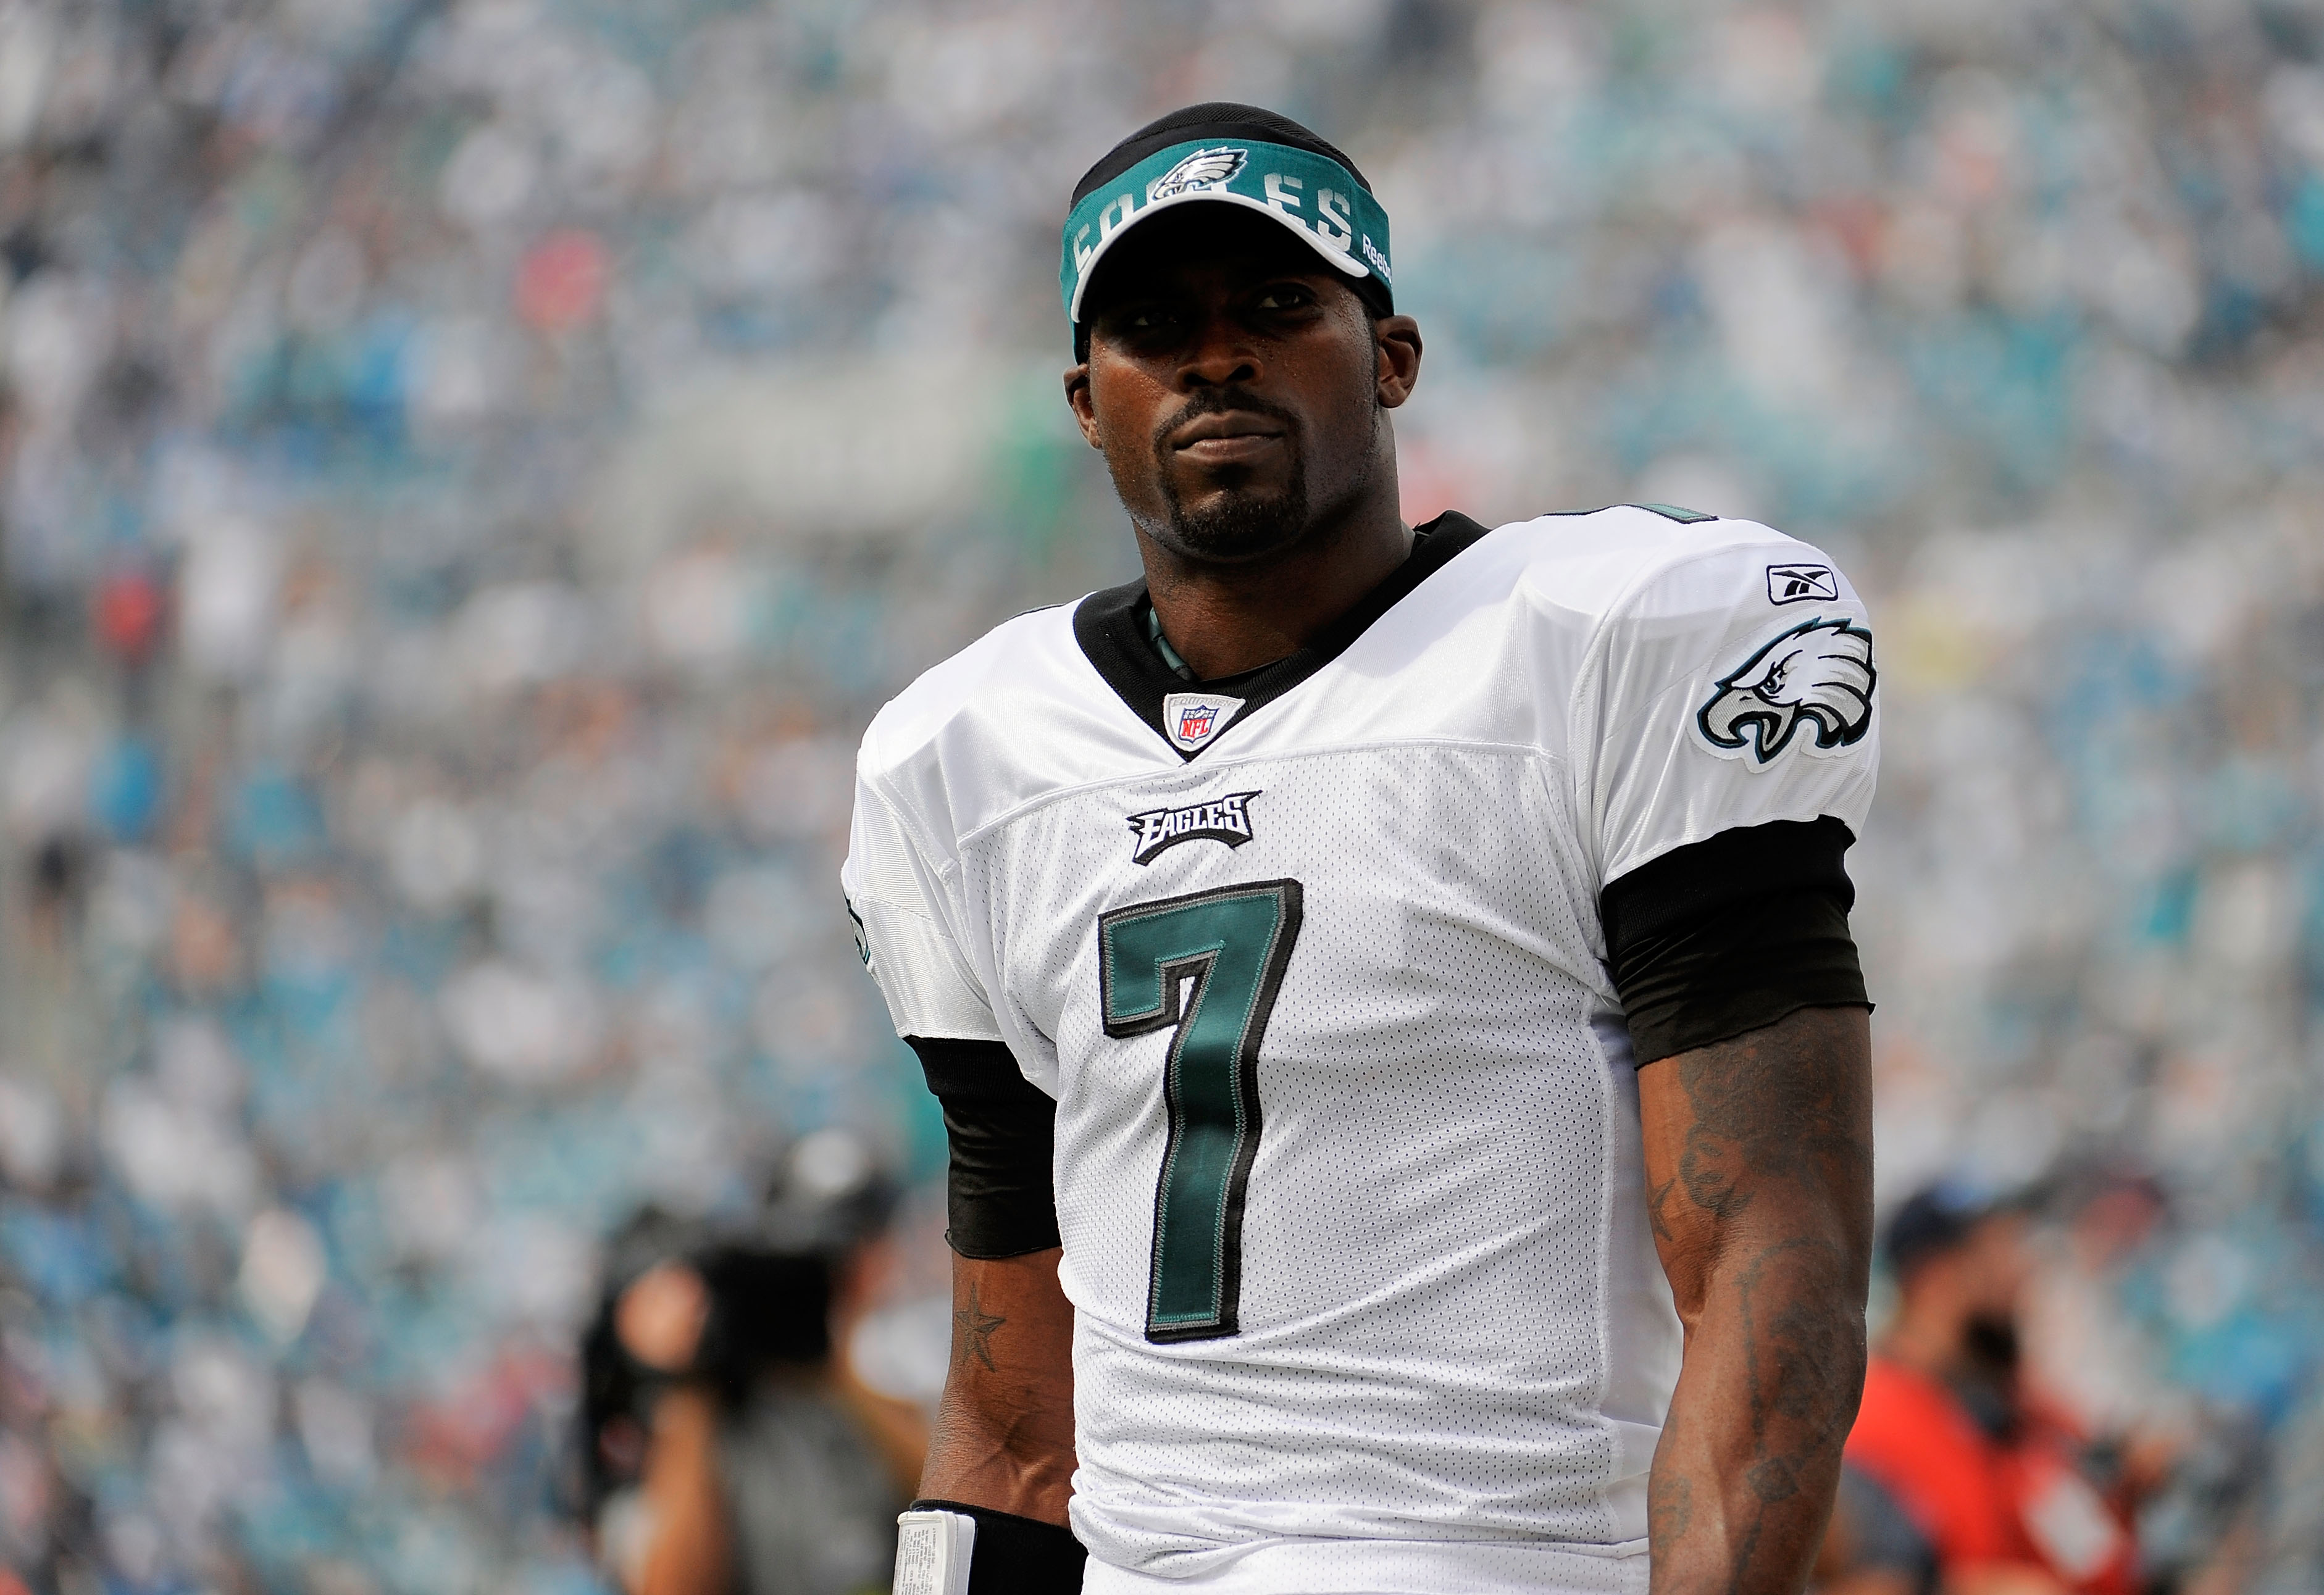 Michael Vick on X: Feels like yesterday. I played ATLiens on